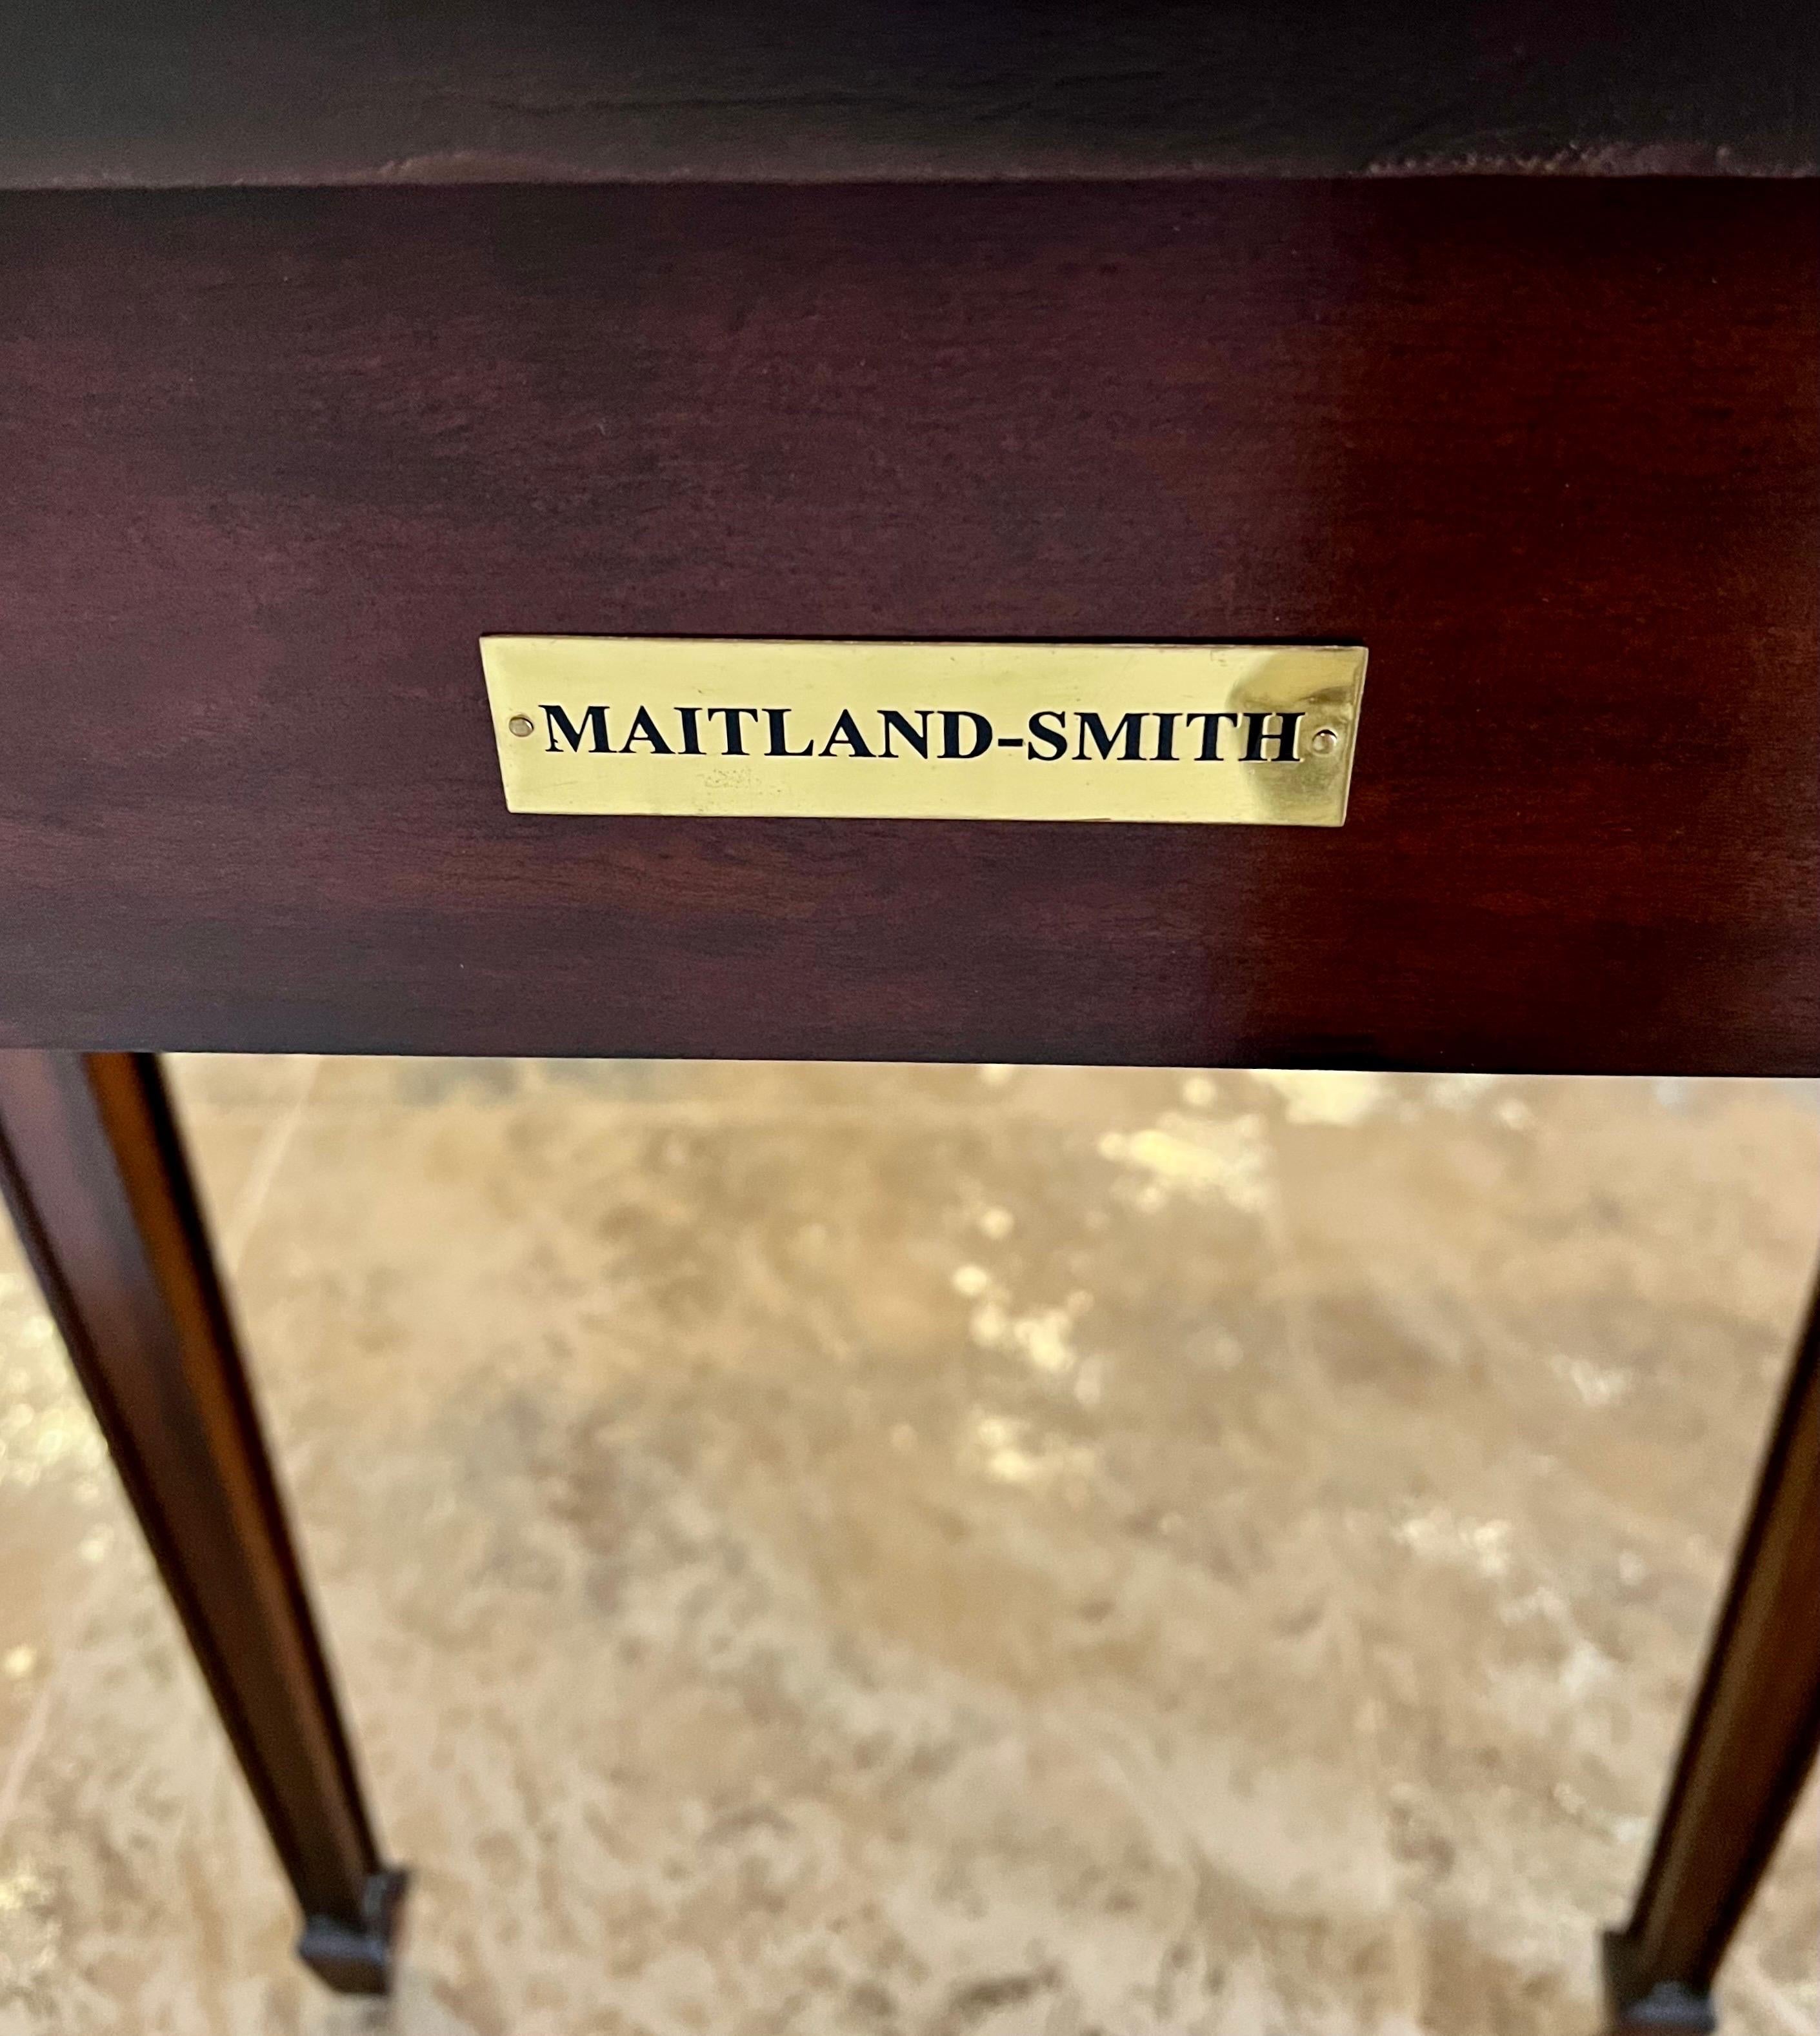 Classic mahogany console table with leather top and carved details on front and corners. Supported on six, not four, tapered legs. Signed by Maitland Smith. Why not own the best?